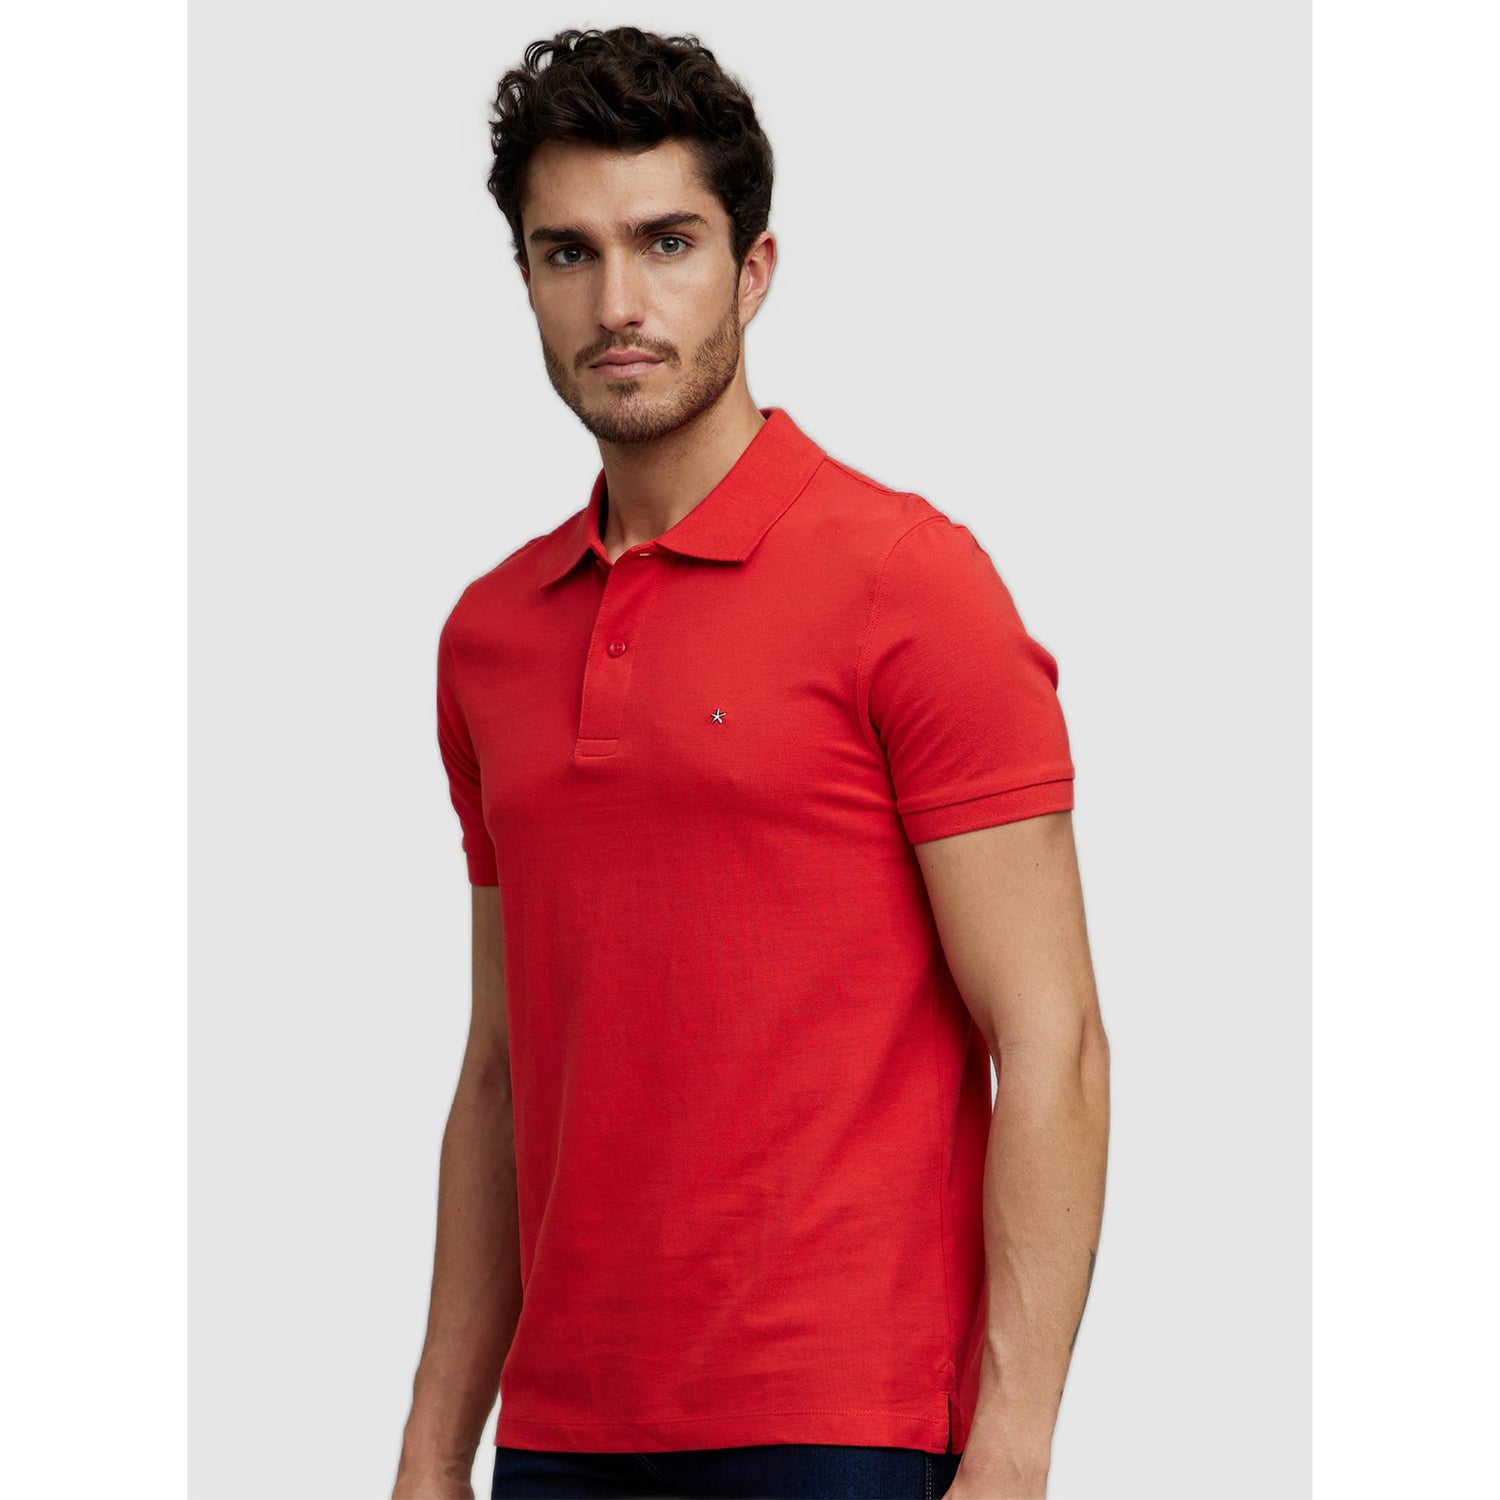 Red Polo Collar Slim Fit Cotton T-shirt (ECTEONE)